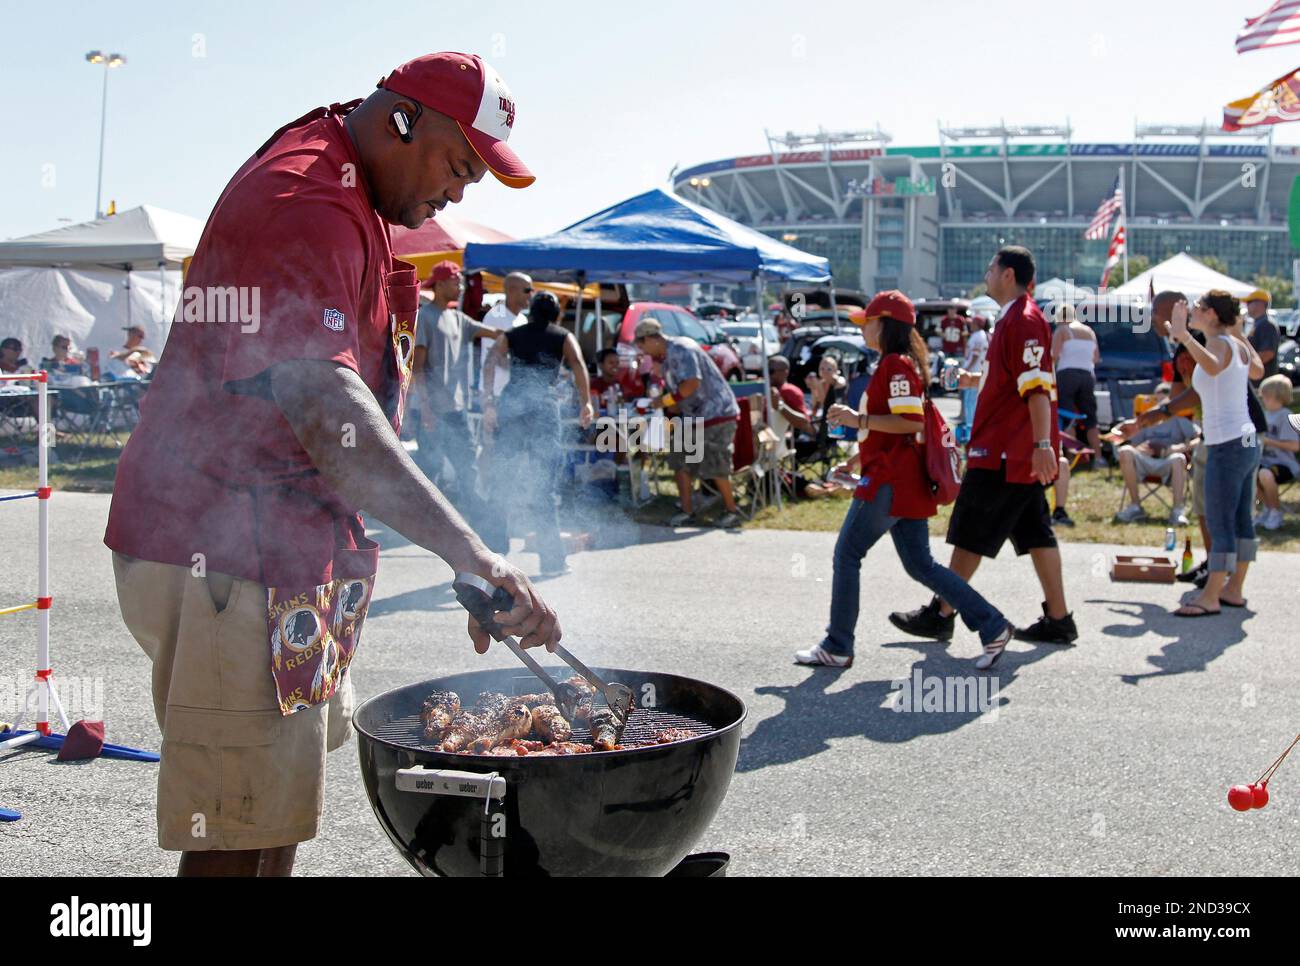 Warren Sumlin barbecues in the parking lot of FedEx Field before an NFL  football game between the Washington Redskins and Houston Texans in  Landover, Md., on Sunday, Sept. 19, 2010. (AP Photo/Evan